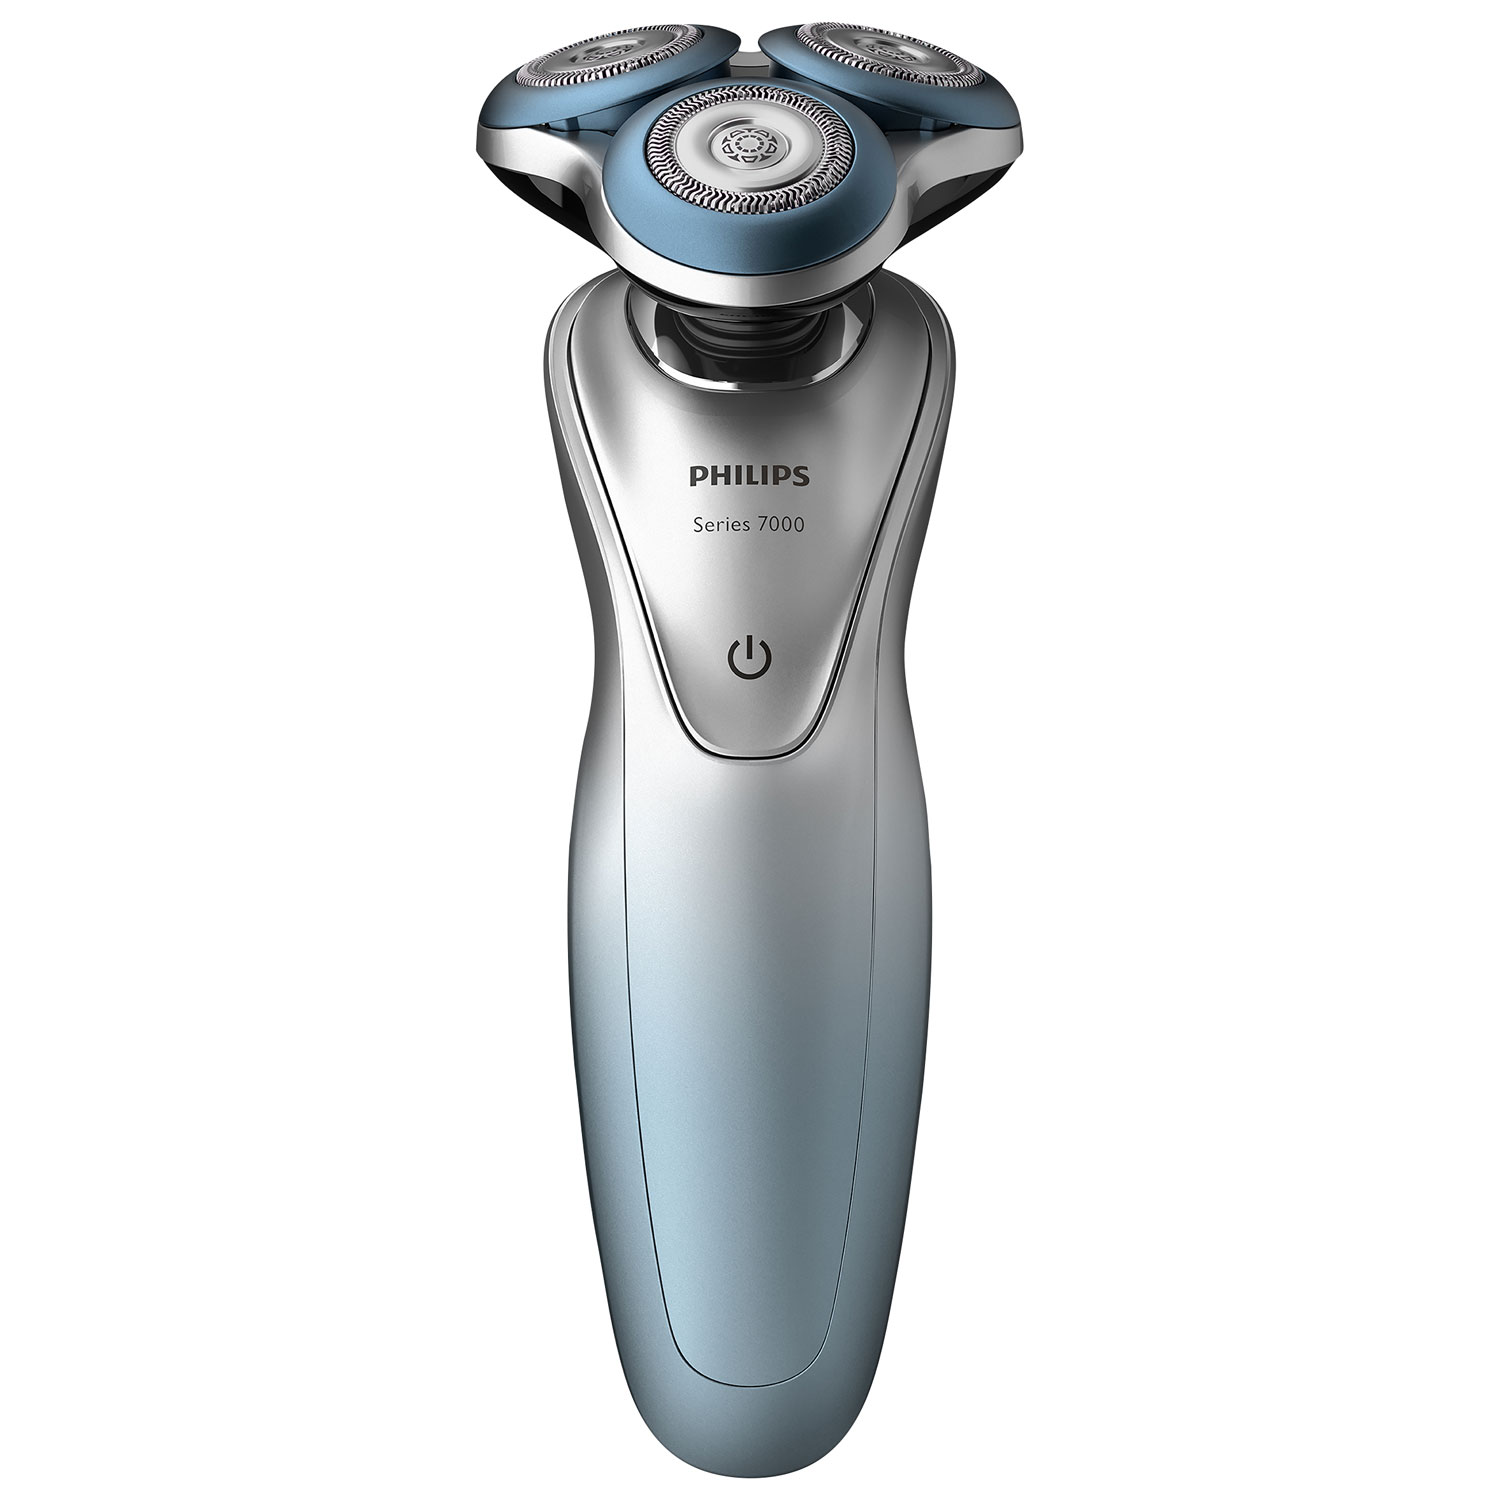 Philips Series 7000 Wet/Dry Cordless Rotary Shaver (S7910/16) - Light Blue